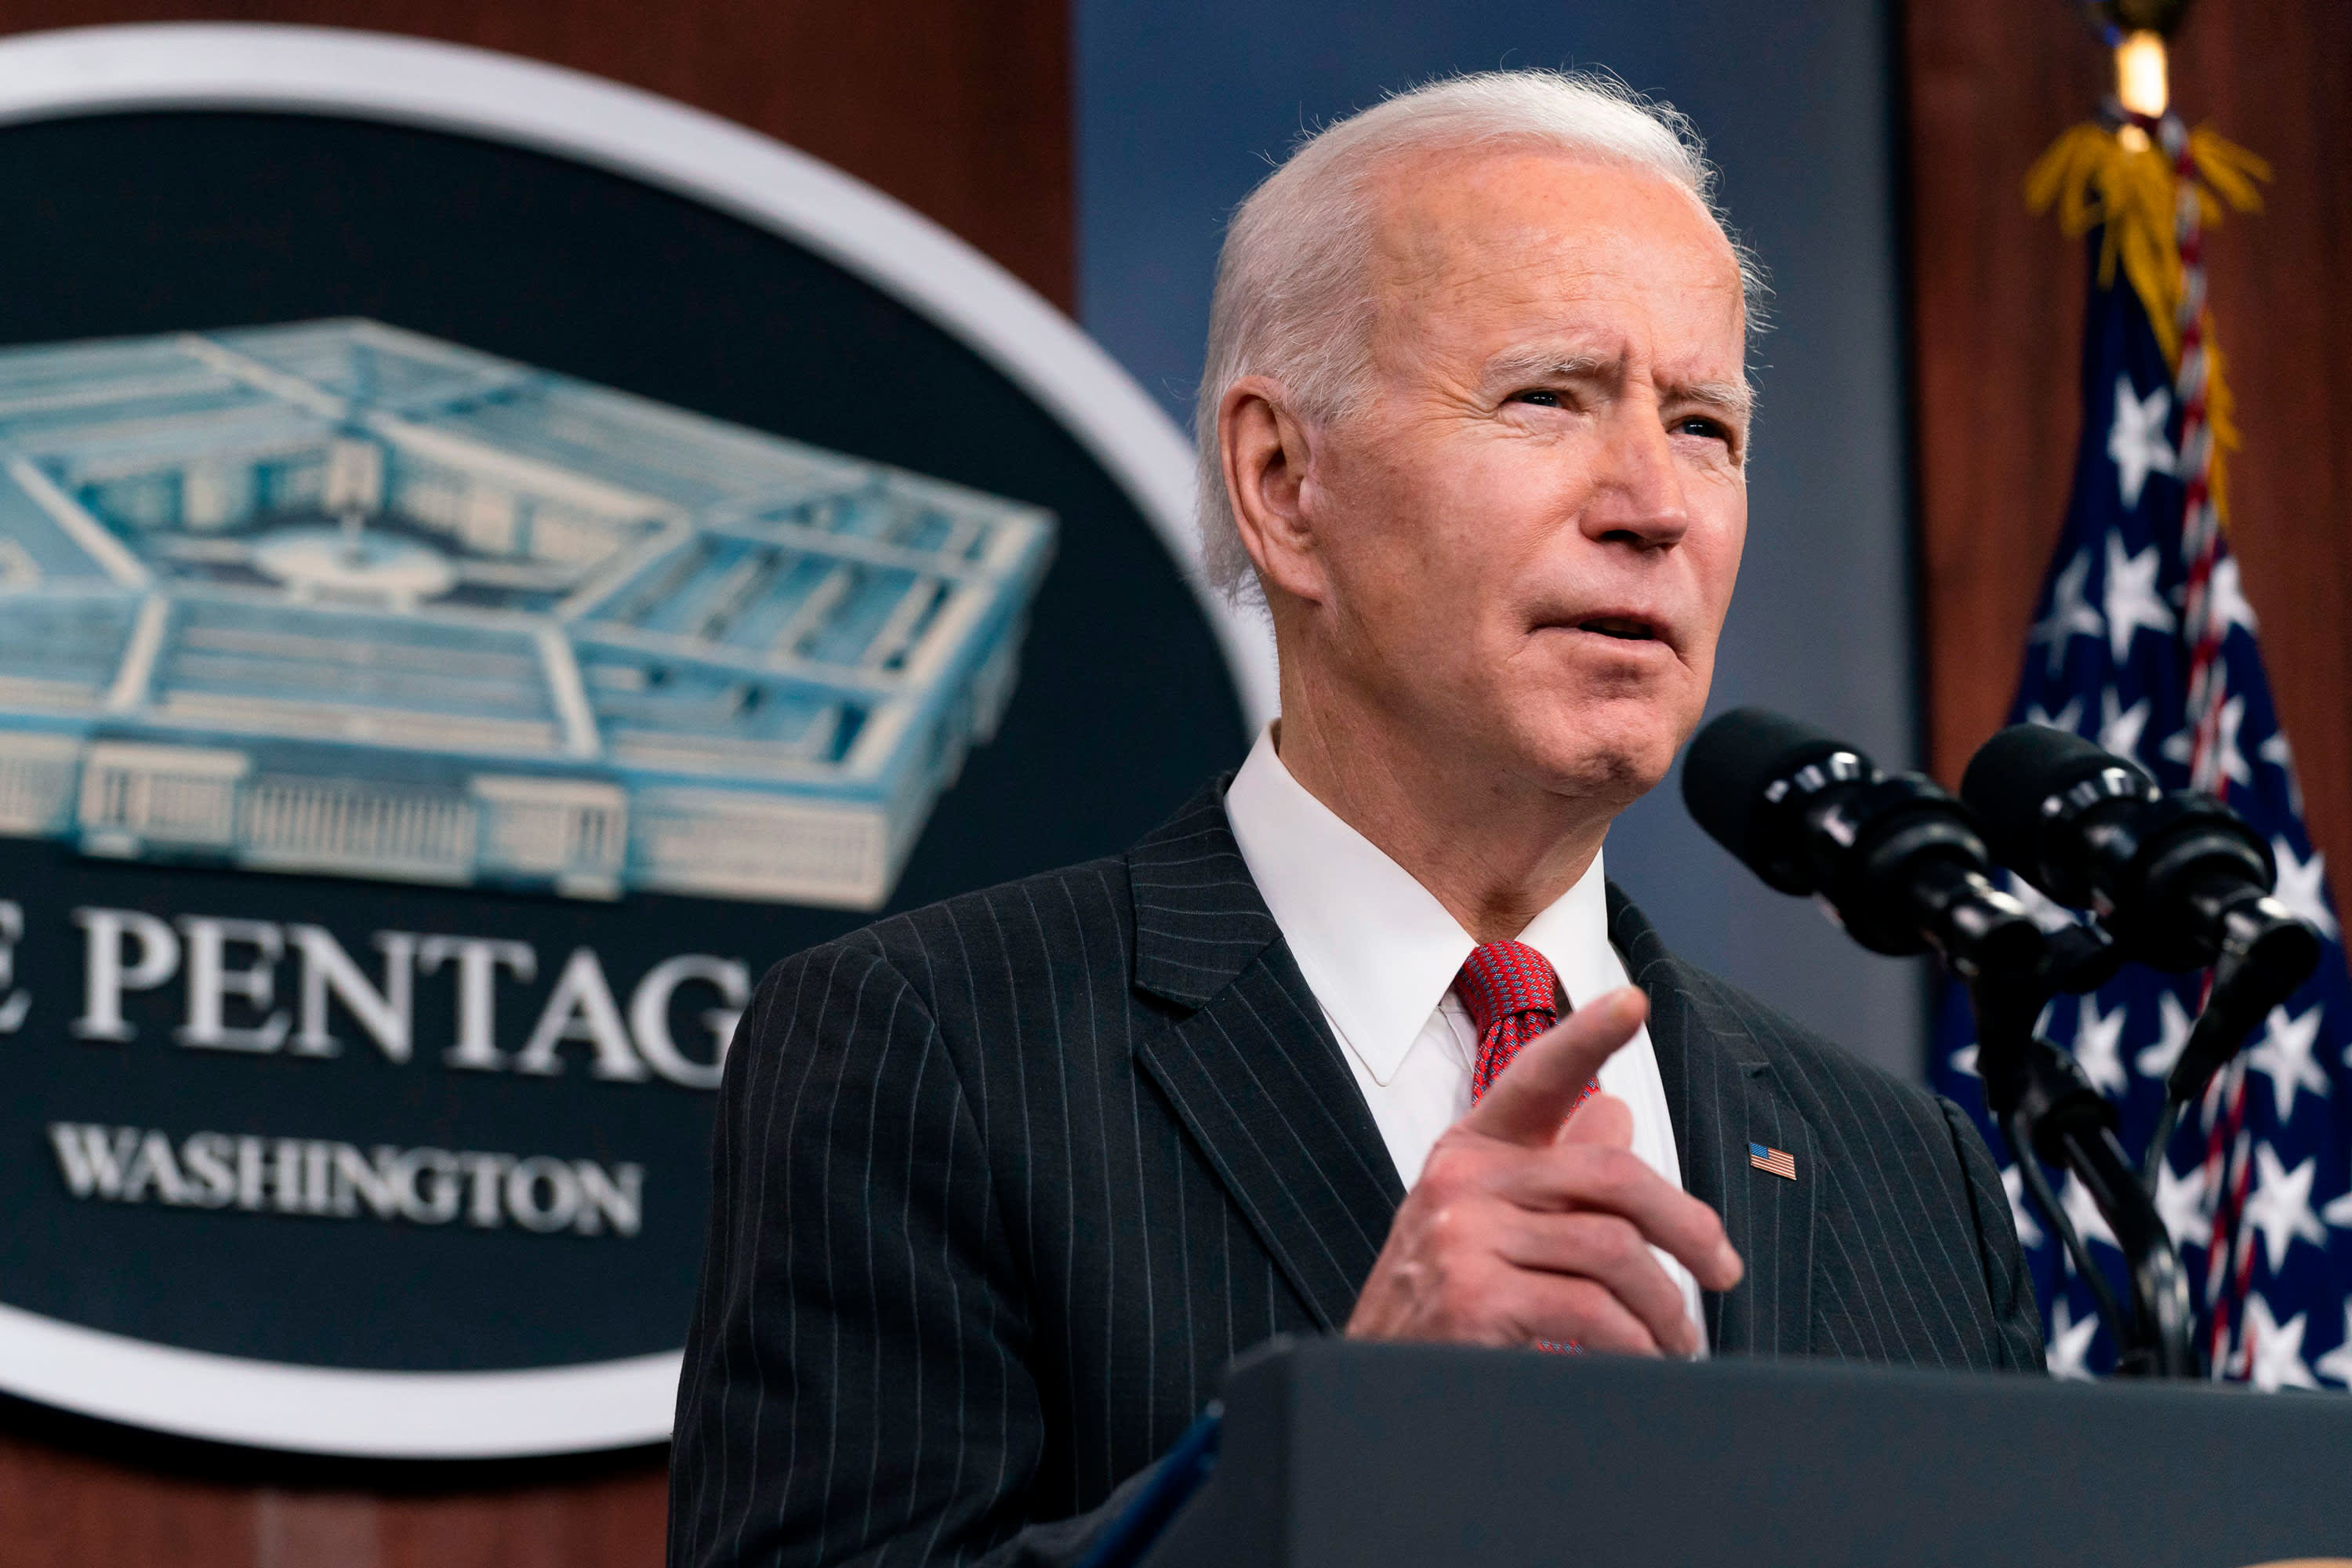 Biden signs executive order to address chip shortages through a supply chain review